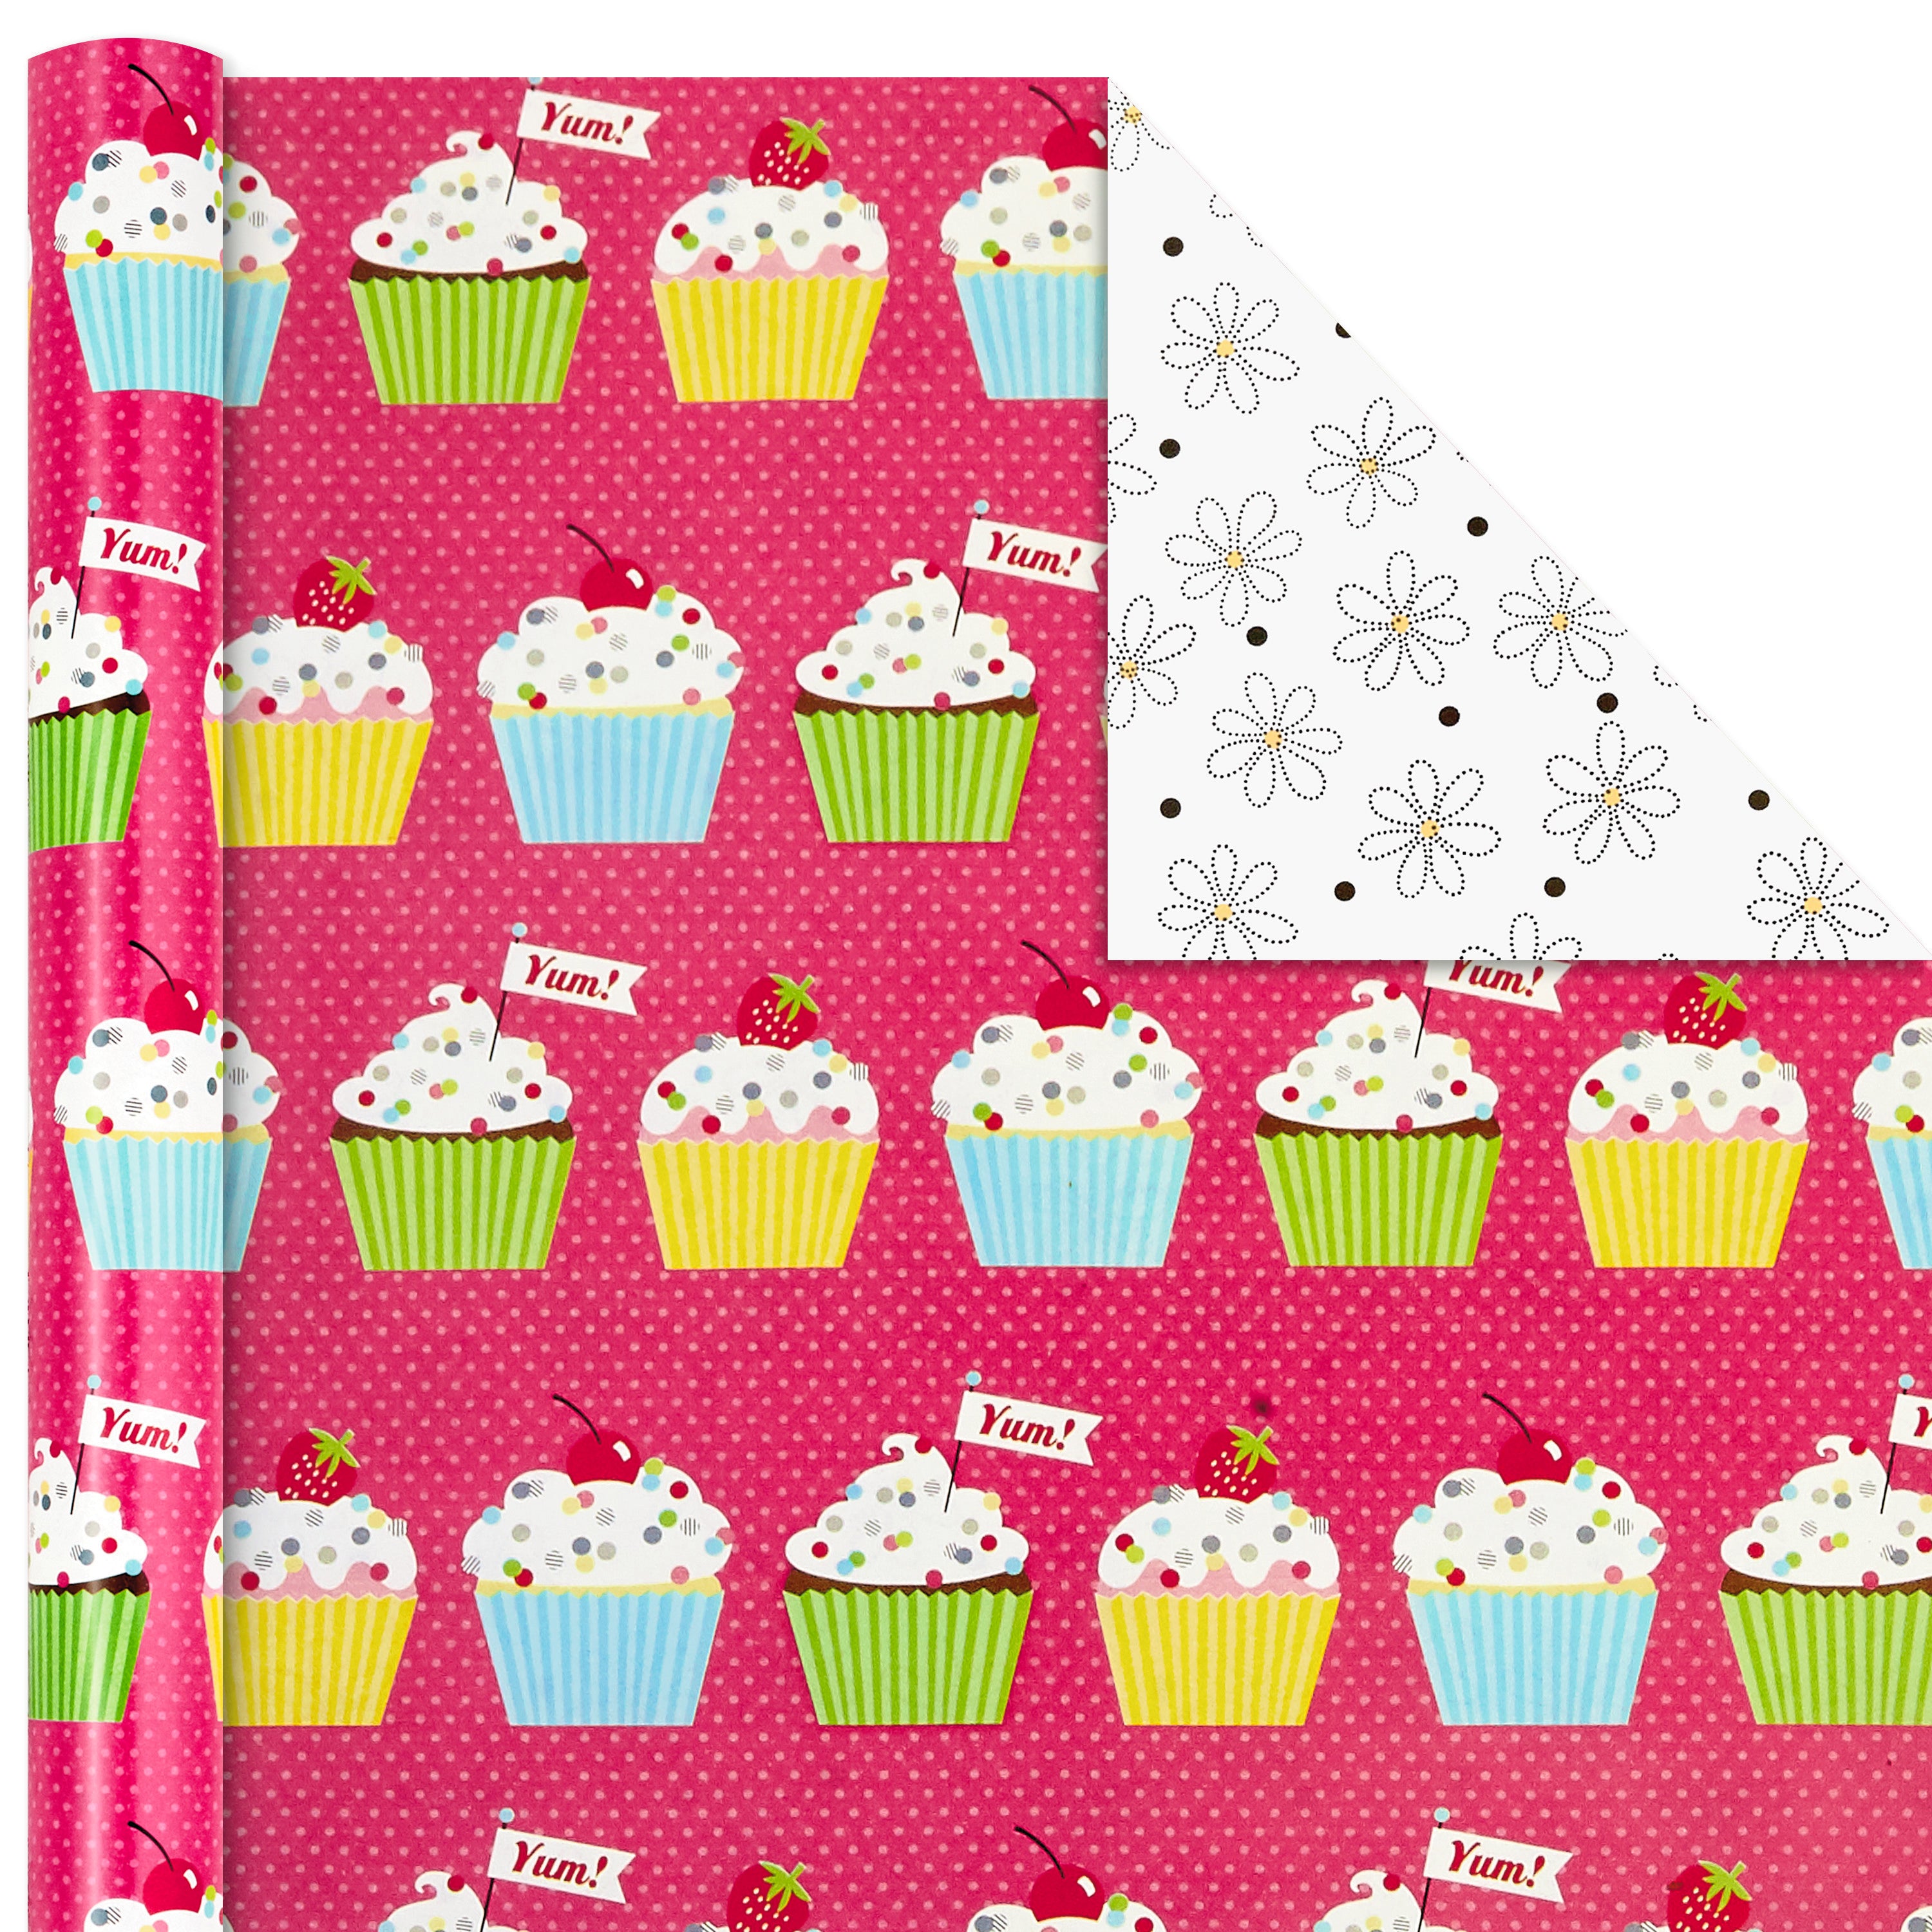 Hallmark All Occasion Reversible Wrapping Paper Bundle - Happy Birthday (3 Rolls - 75 sq. ft. ttl) Cupcakes, Stripes, Flowers, Polka Dots